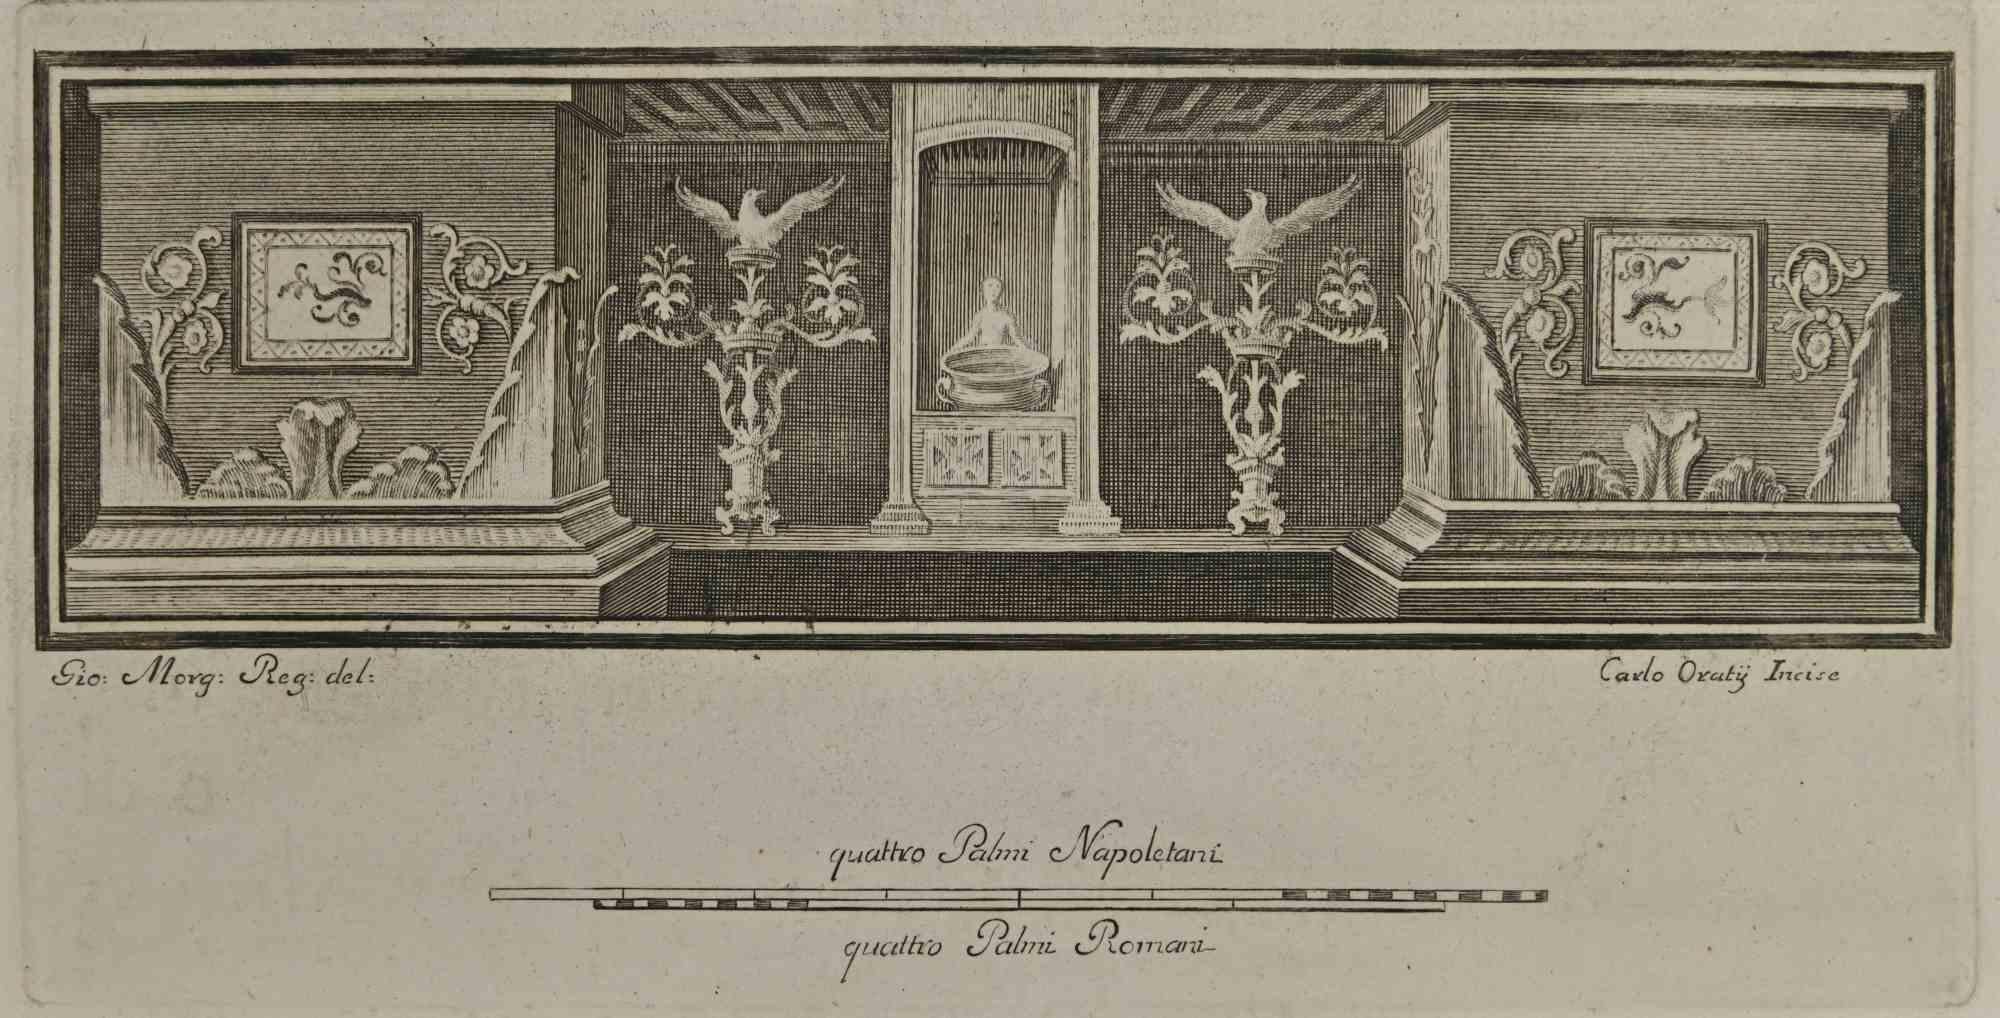 Ancient Roman Fresco from the series "Antiquities of Herculaneum", is an etching on paper realized by Carlo Ortij in the 18th Century.

 

Signed on the plate.

 

Good conditions except for some minor stains and a cutting on the lower left.

 

The